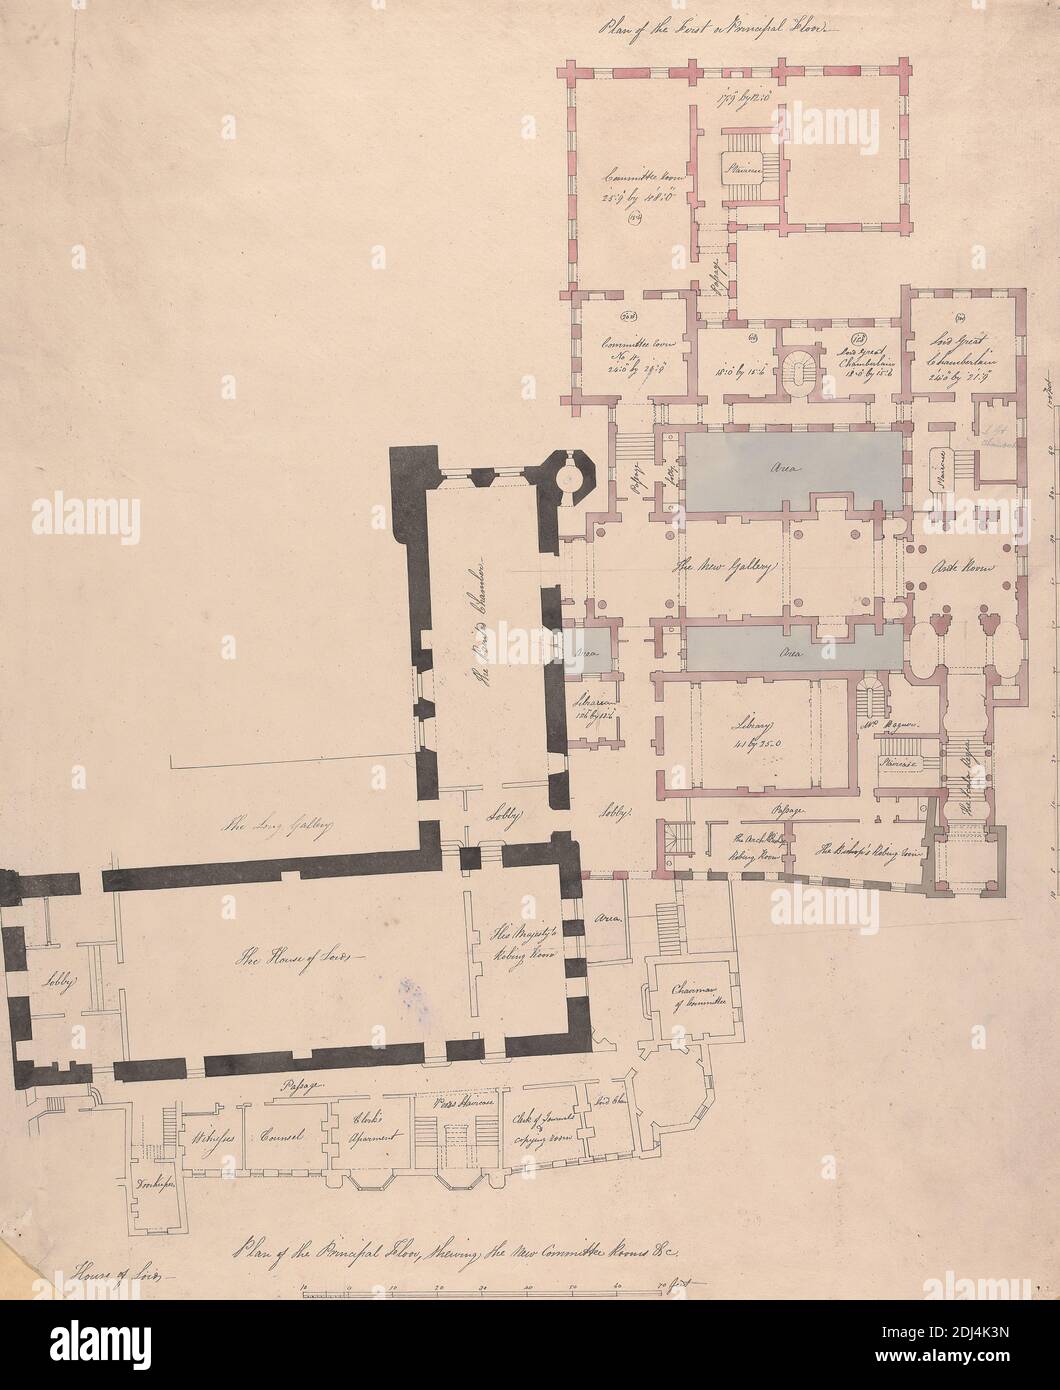 Plan of the Principal Story, Shewing the New Committee Rooms &c, House of Lords, Attributed to office of Sir John Soane, 1753–1837, British, ca. 1794, Graphite, pen and black ink, watercolor on moderately textured, moderately thick, white wove paper bar scale of 1/14 inch to 1 foot, Sheet: 19 5/8 × 16 1/8 inches (49.8 × 41 cm), architectural subject, plan (formal concept), City of Westminster, England, London, Palace of Westminster, United Kingdom Stock Photo